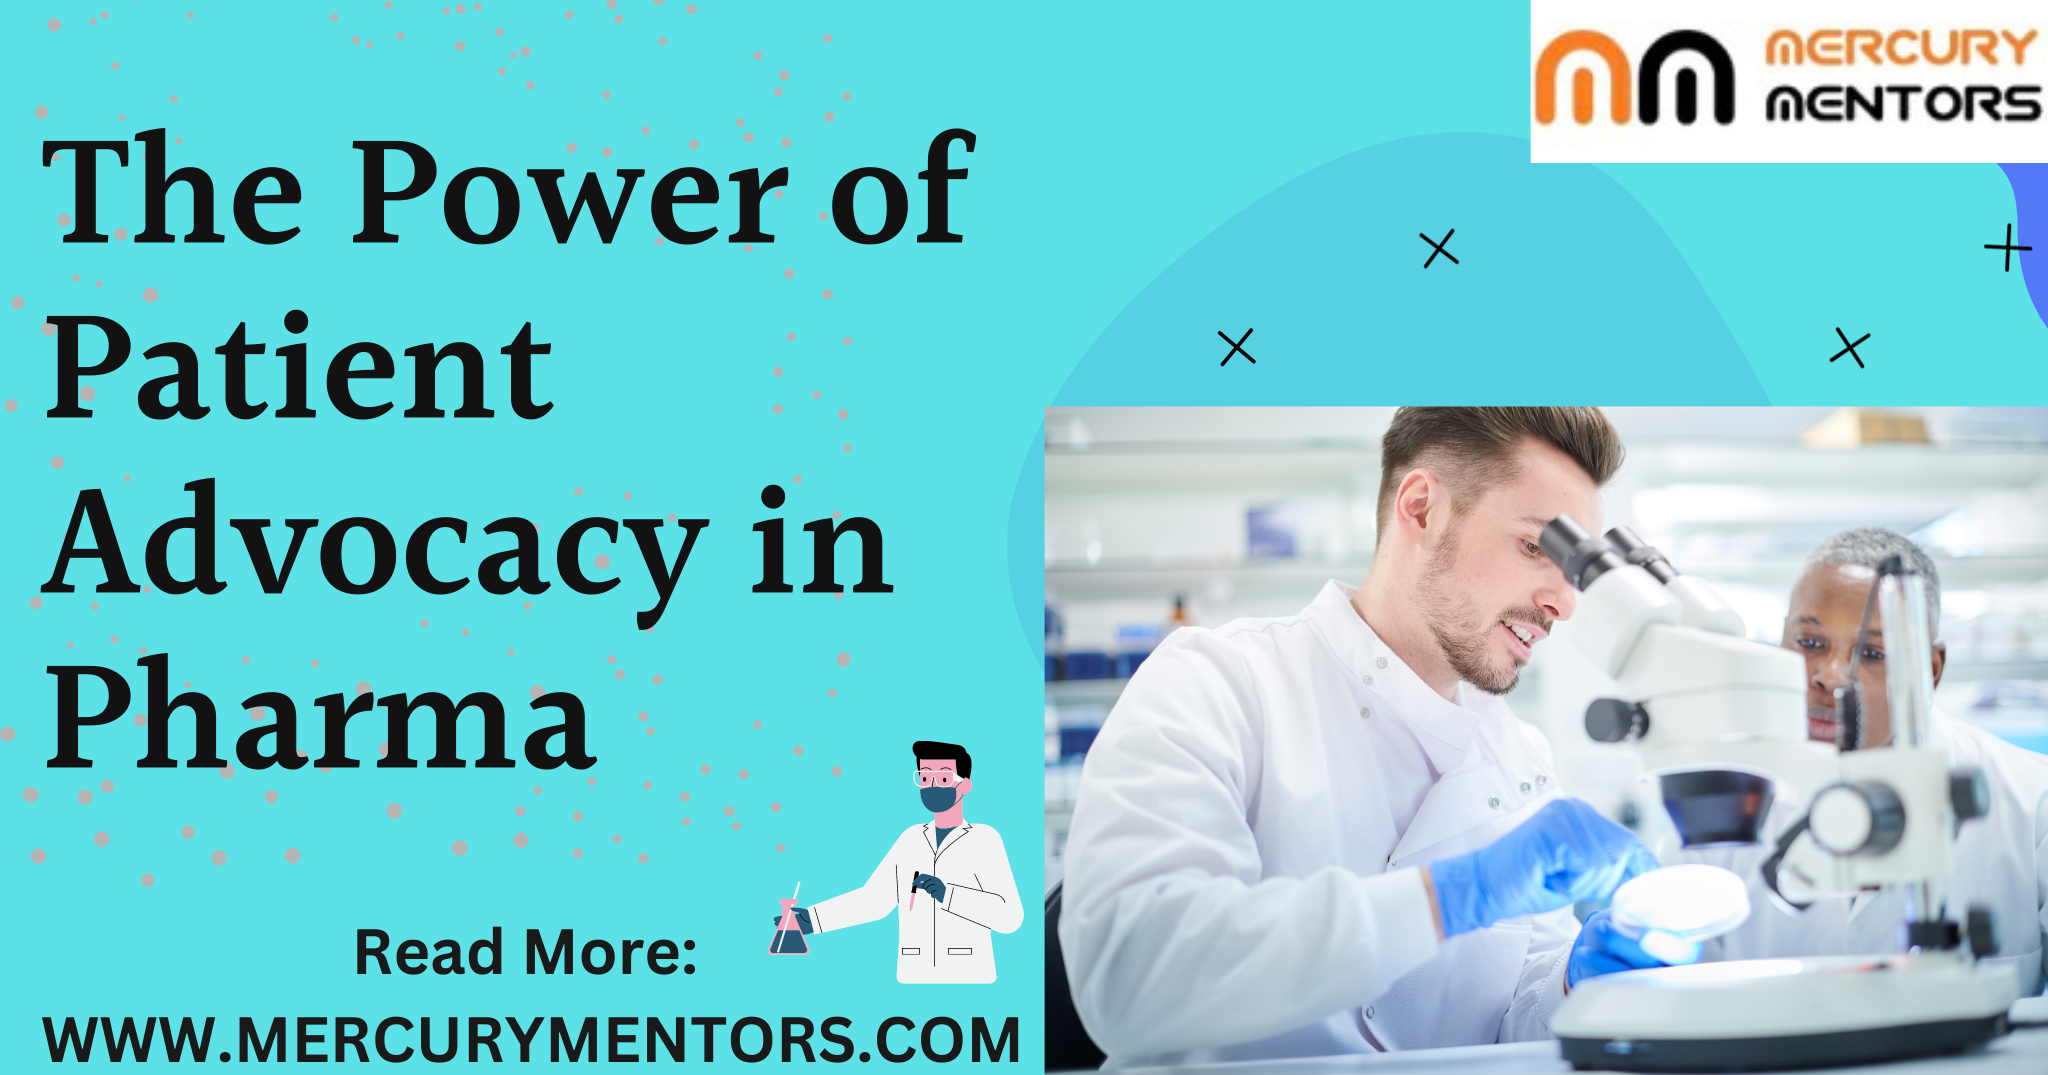  The Power of Patient Advocacy in Pharma